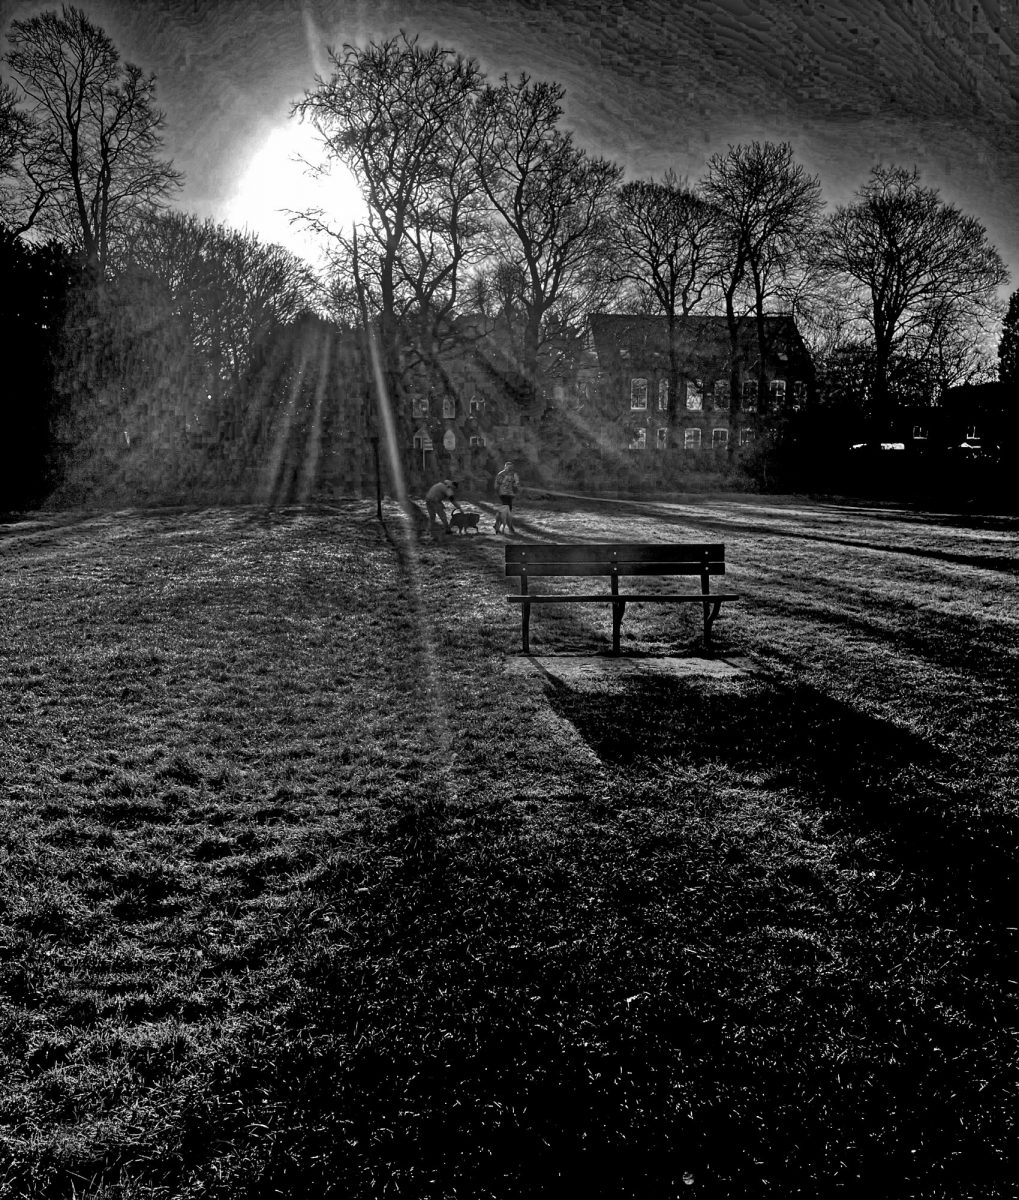 Black & White Photograph. An empty bench in a Derbyshire park.